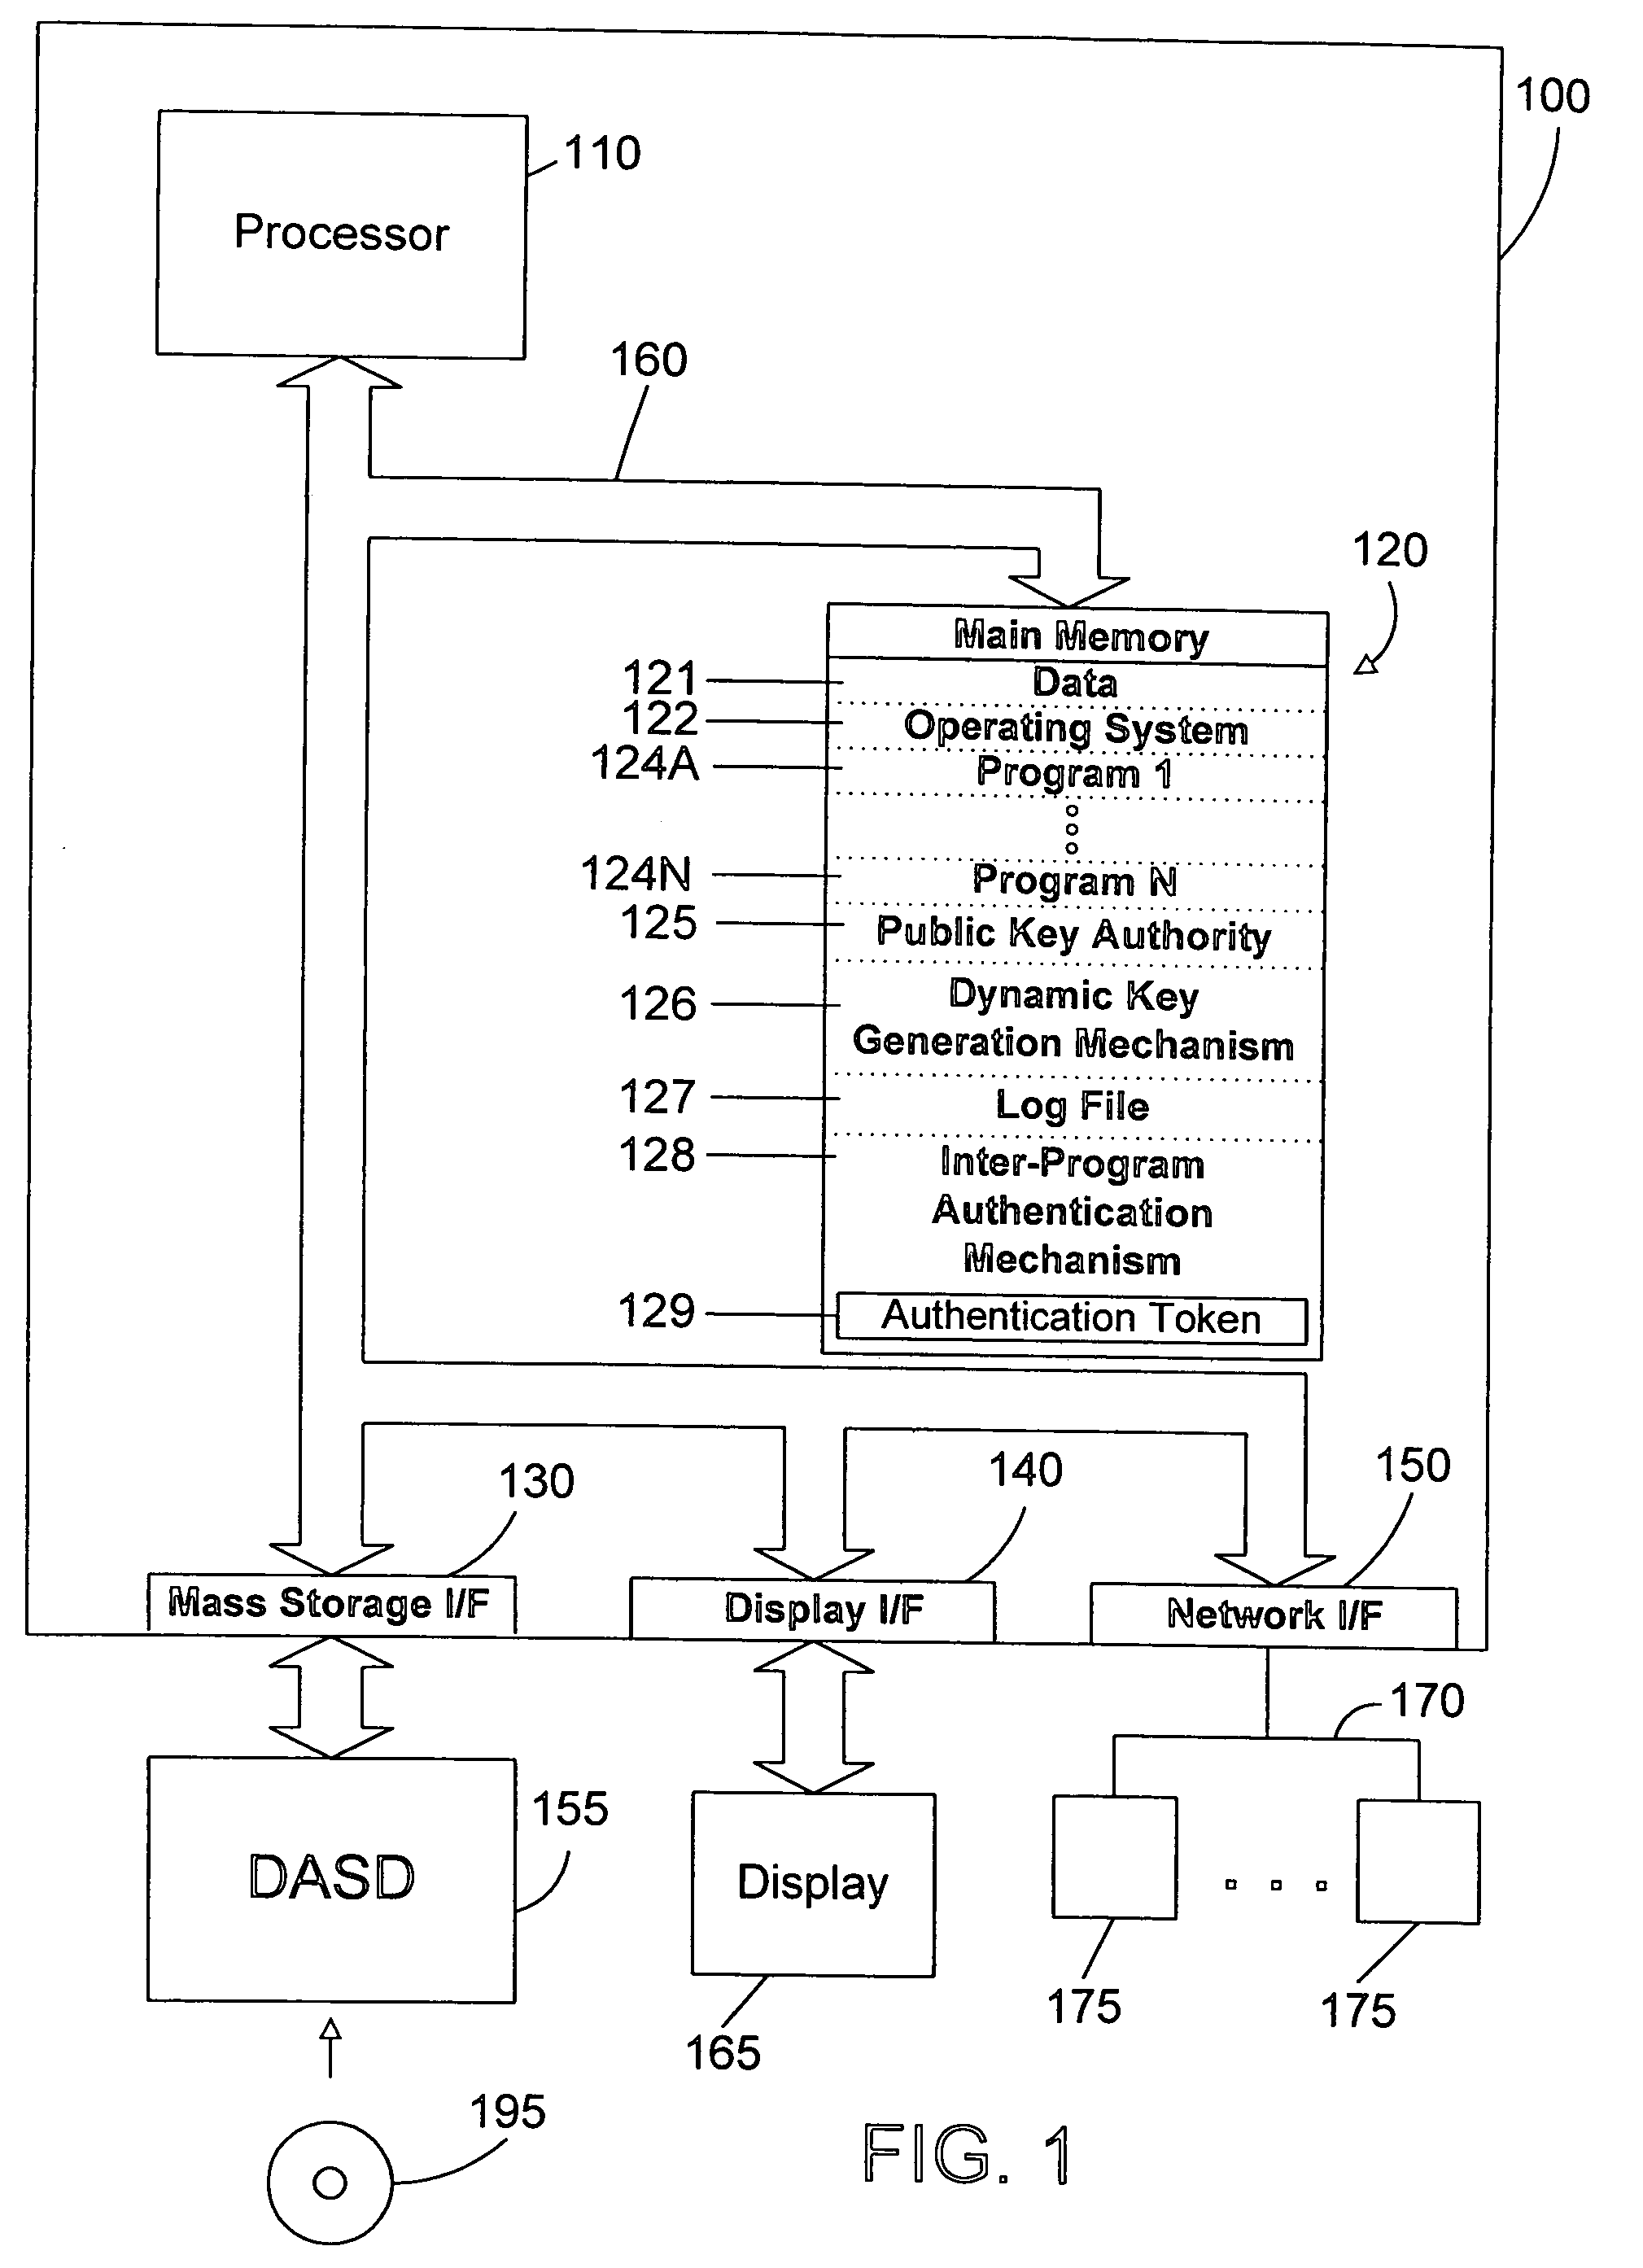 Apparatus and method for inter-program authentication using dynamically-generated public/private key pairs